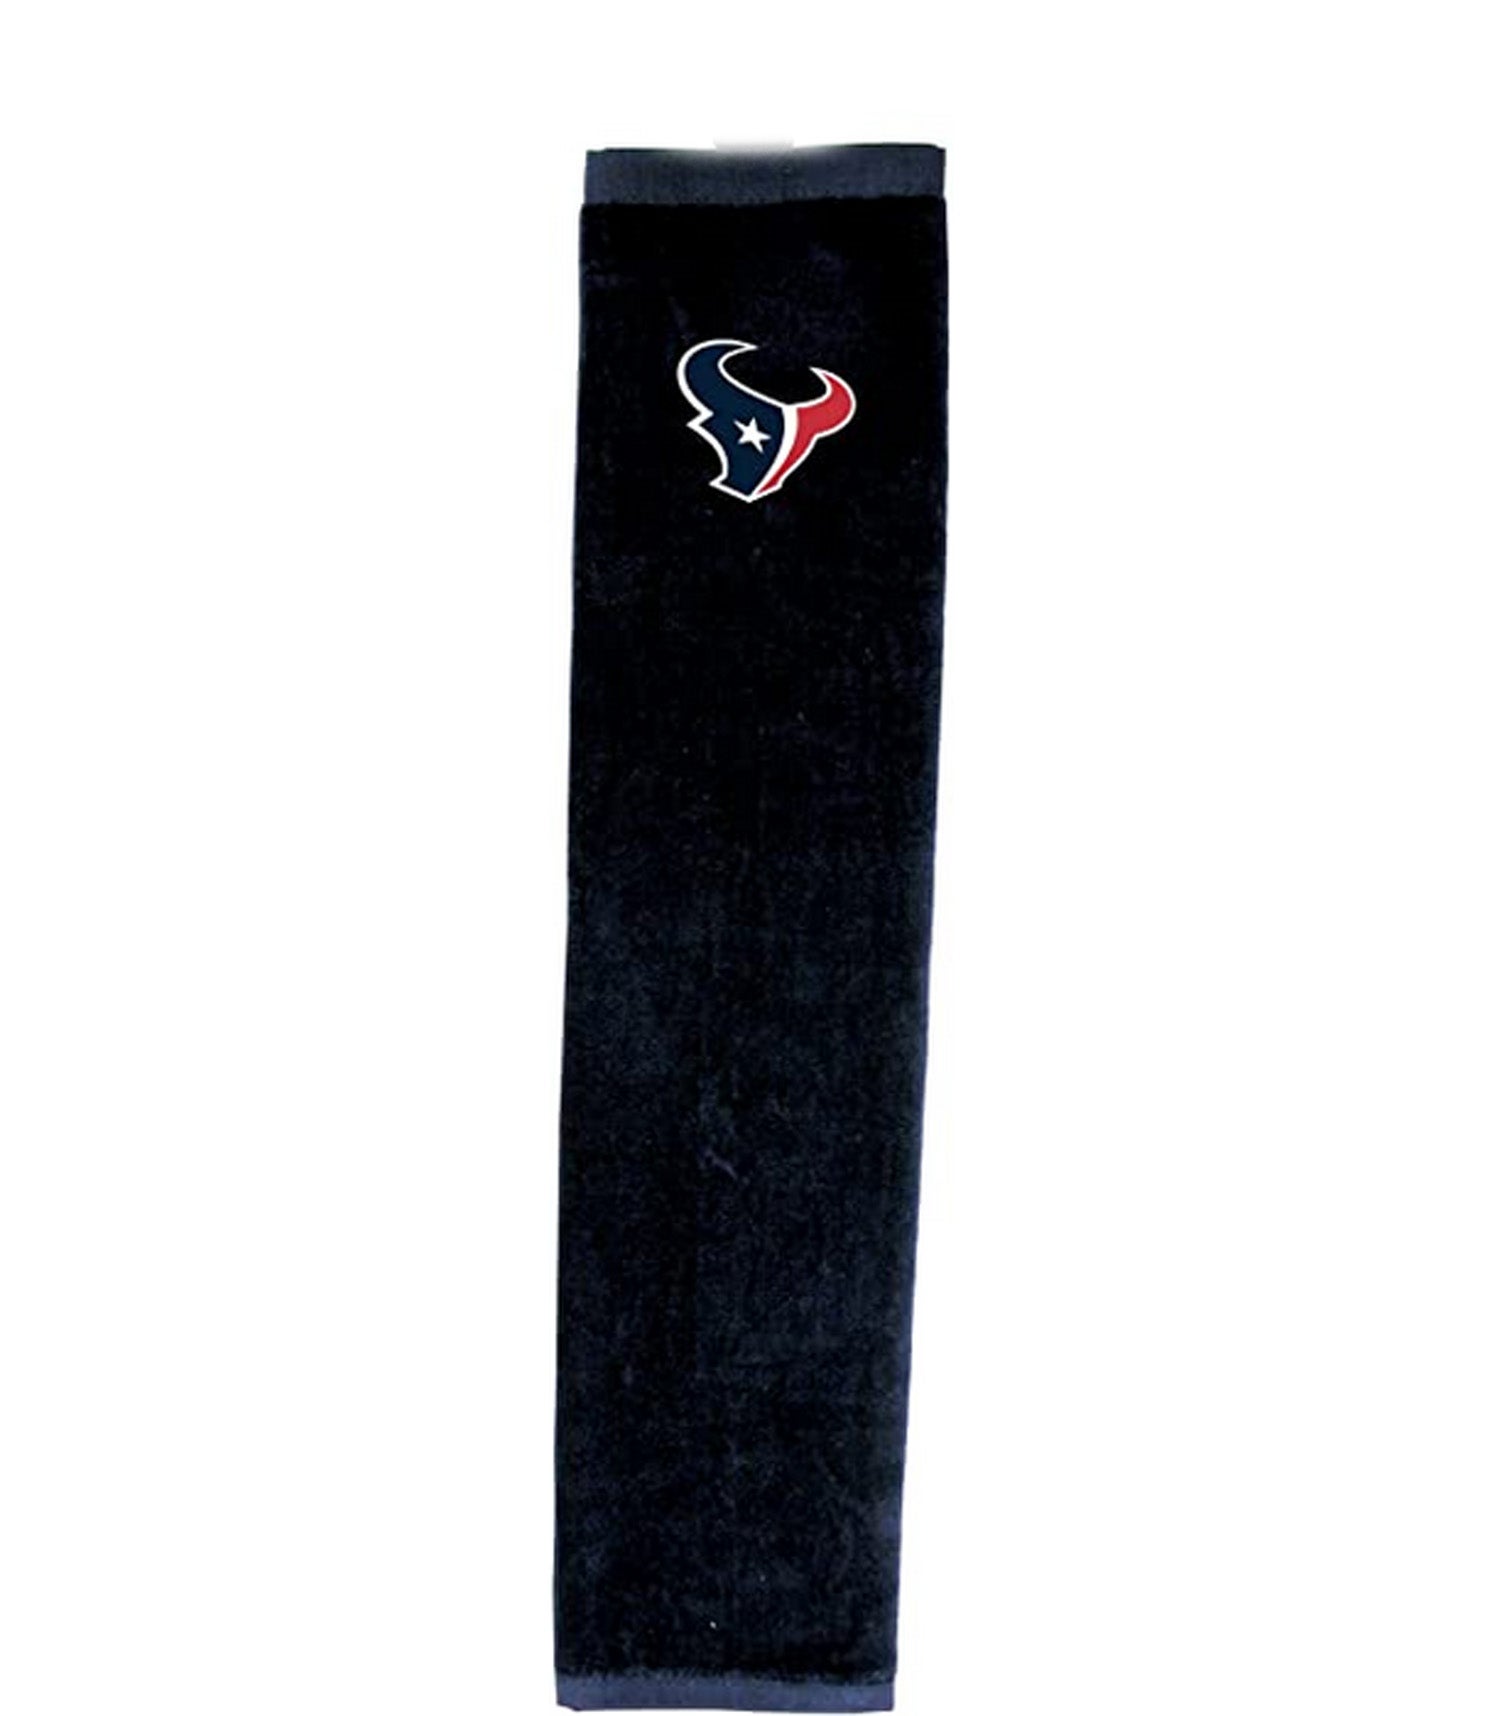 Tennessee Titans Rally Towel - Full color